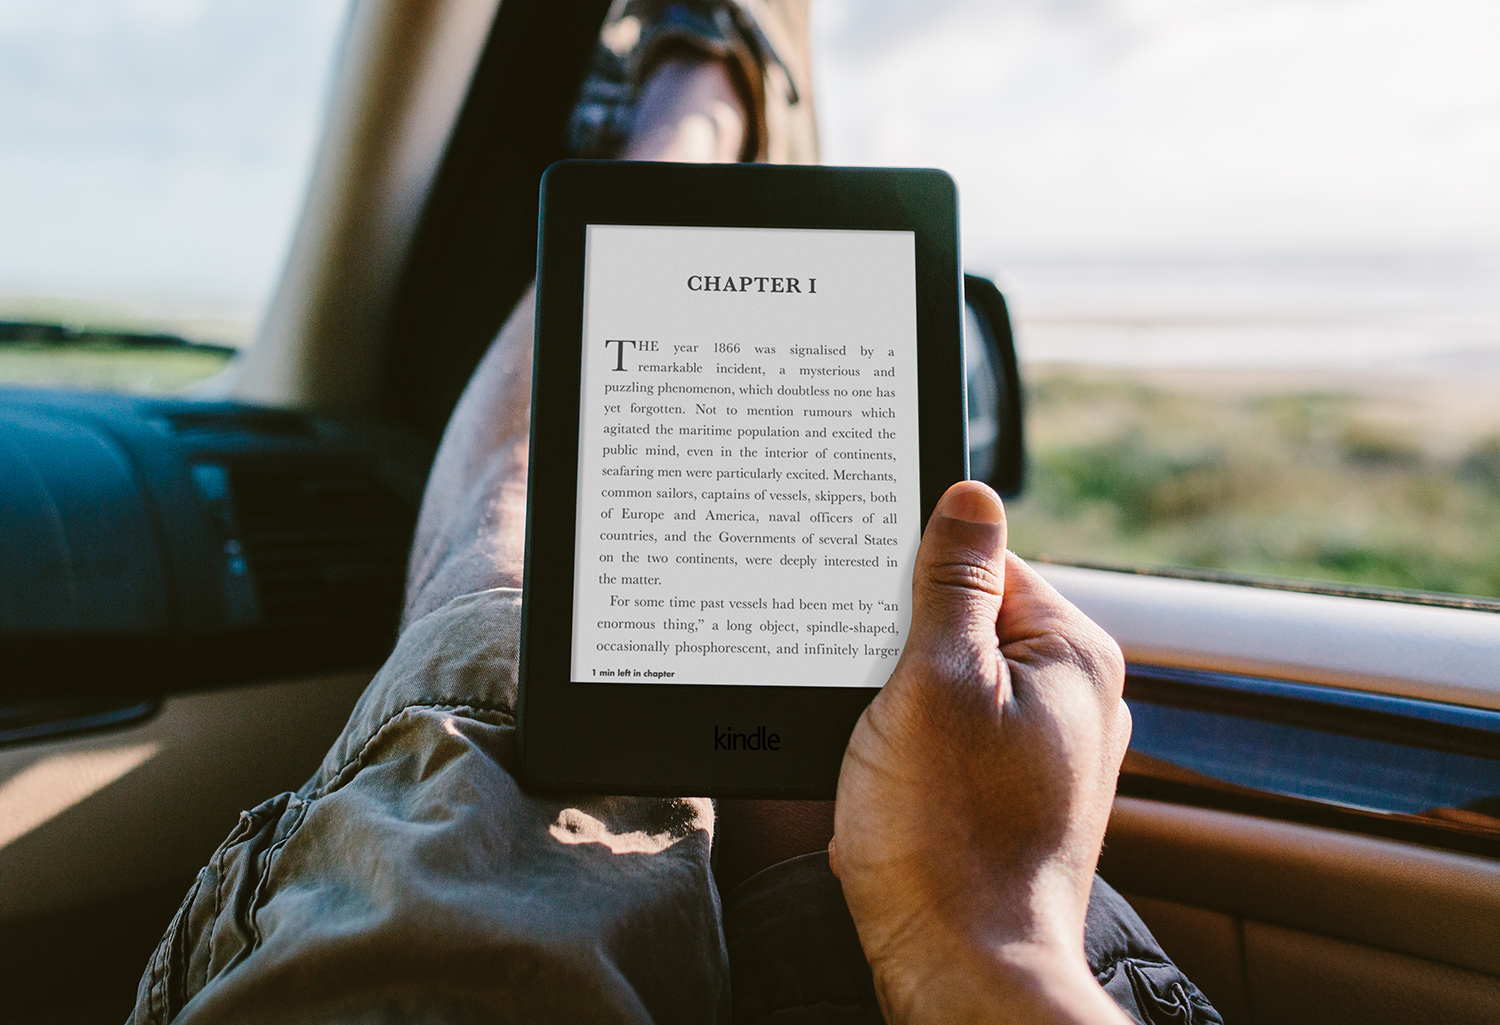 Kindle Paperwhite Amazon Urges Users To Upgrade Older Kindles